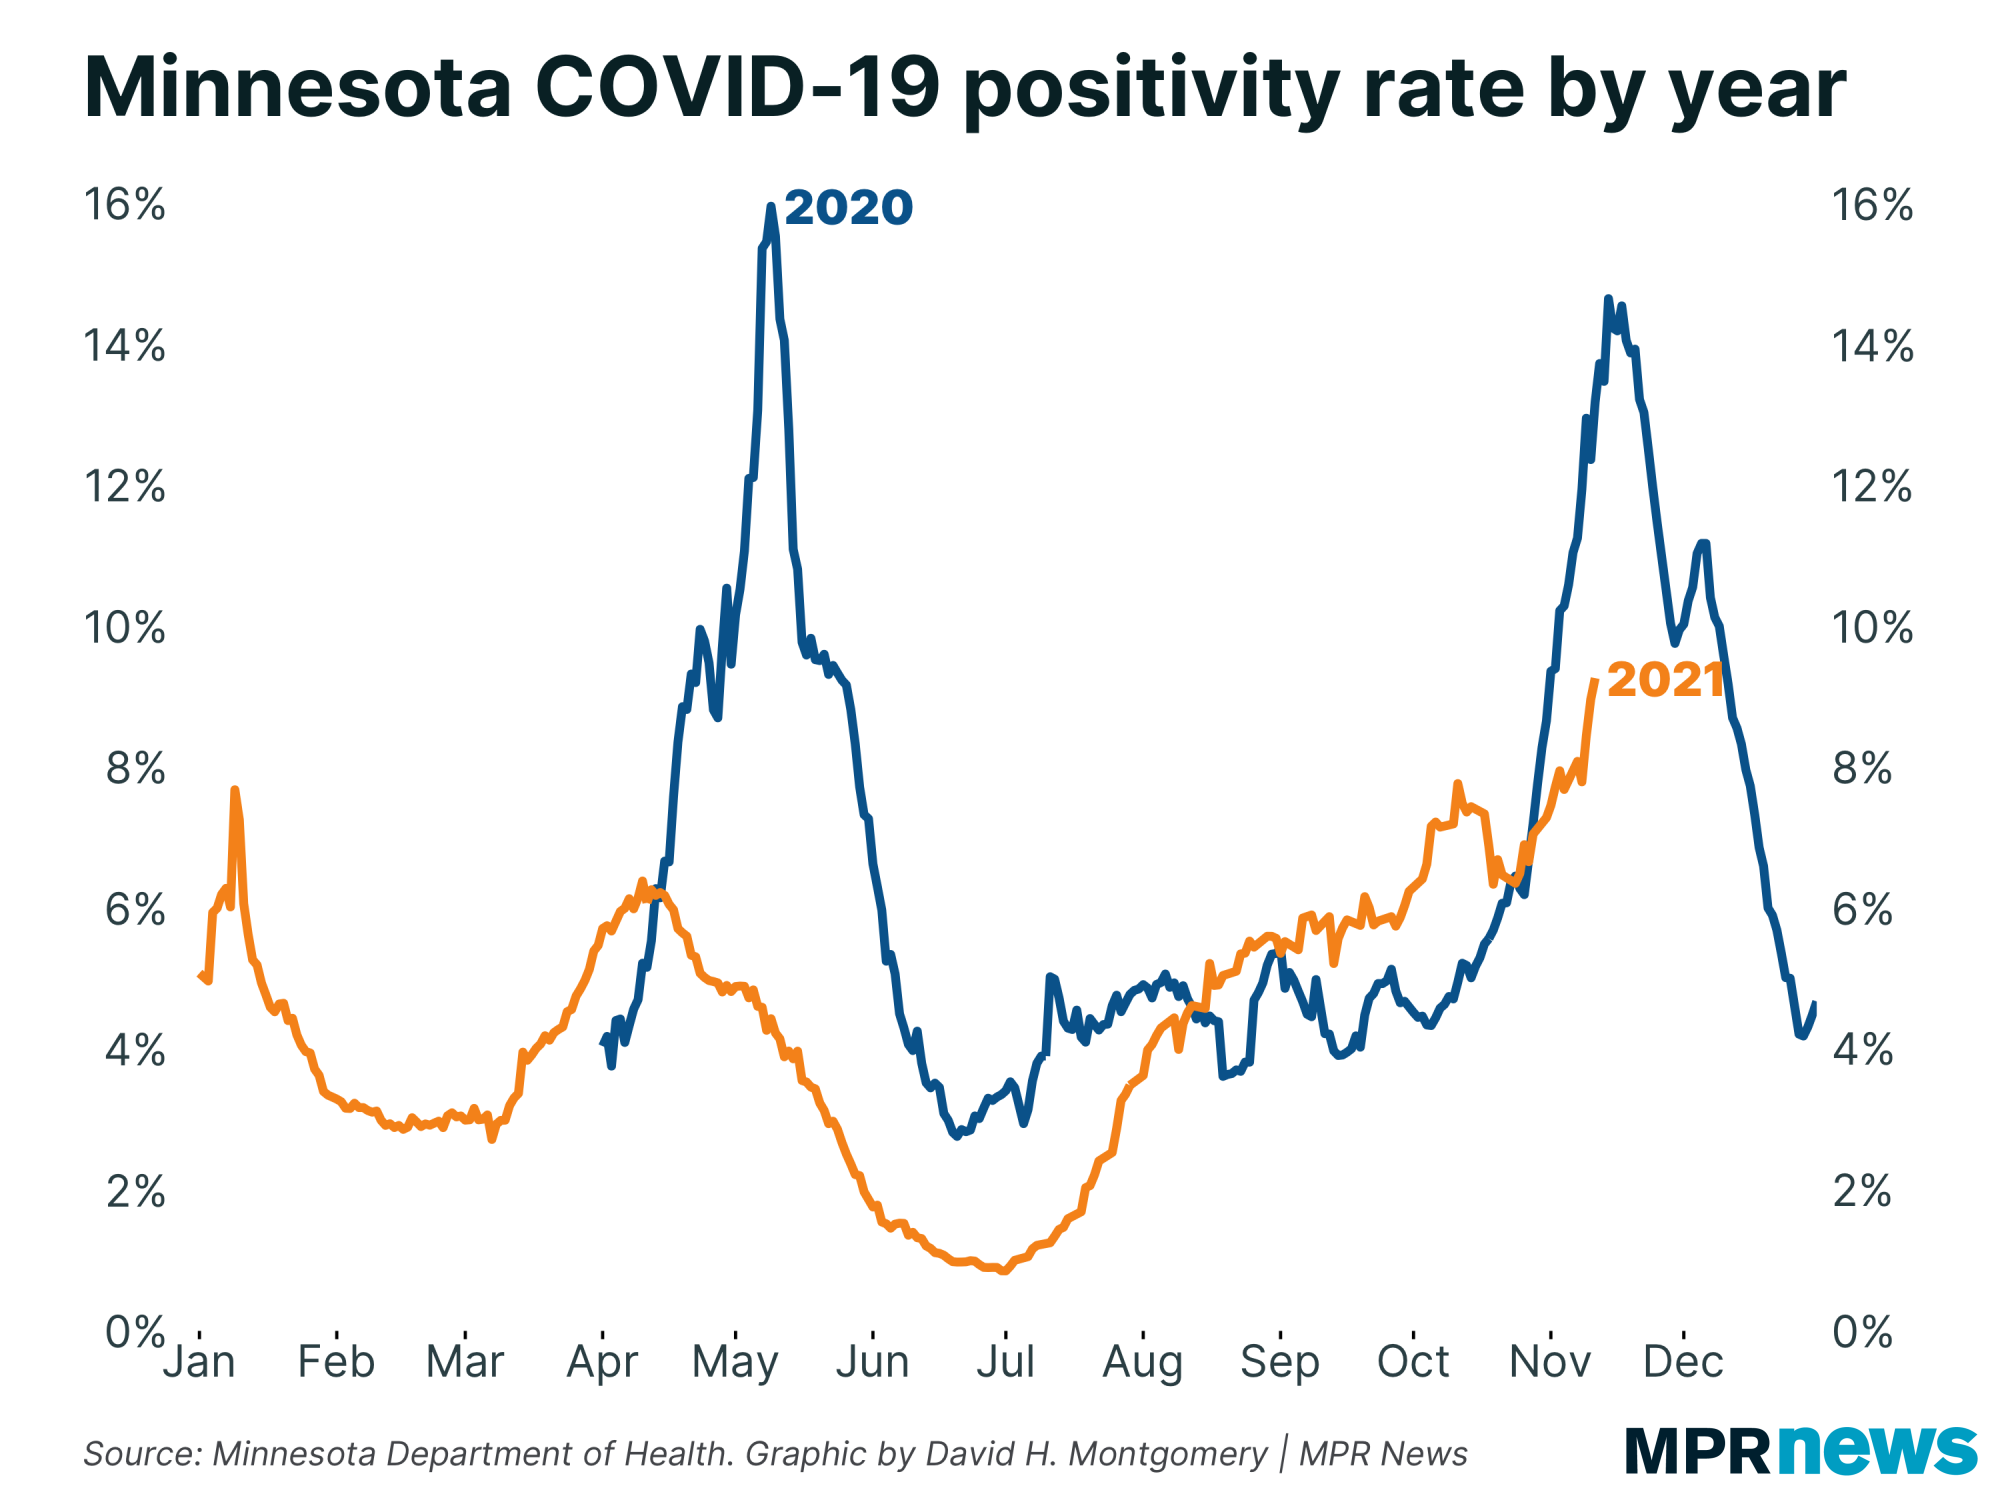 Graph of Minnesota's COVID-19 positivity rate by year